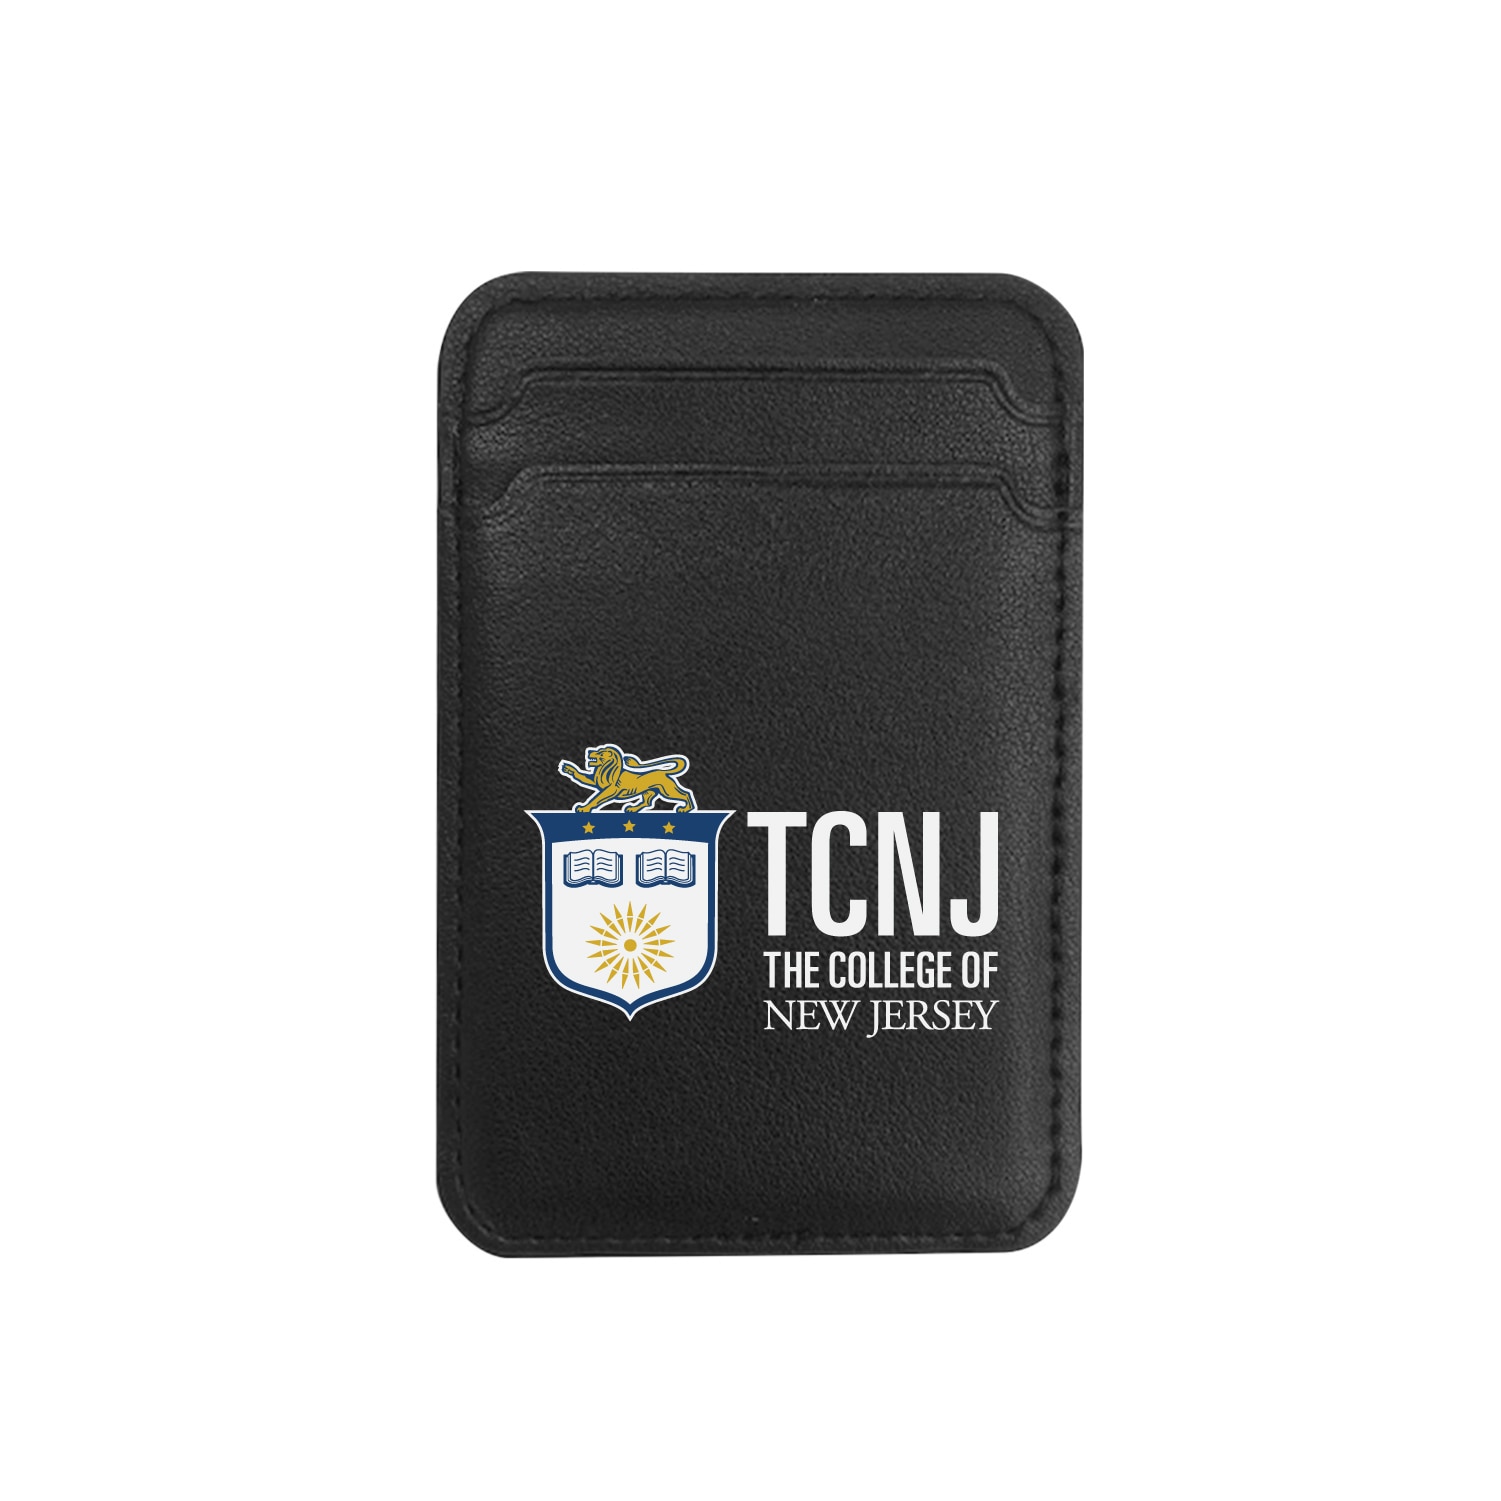 The College of New Jersey - Leather Wallet Sleeve (Top Load, Mag Safe), Black, Classic V1